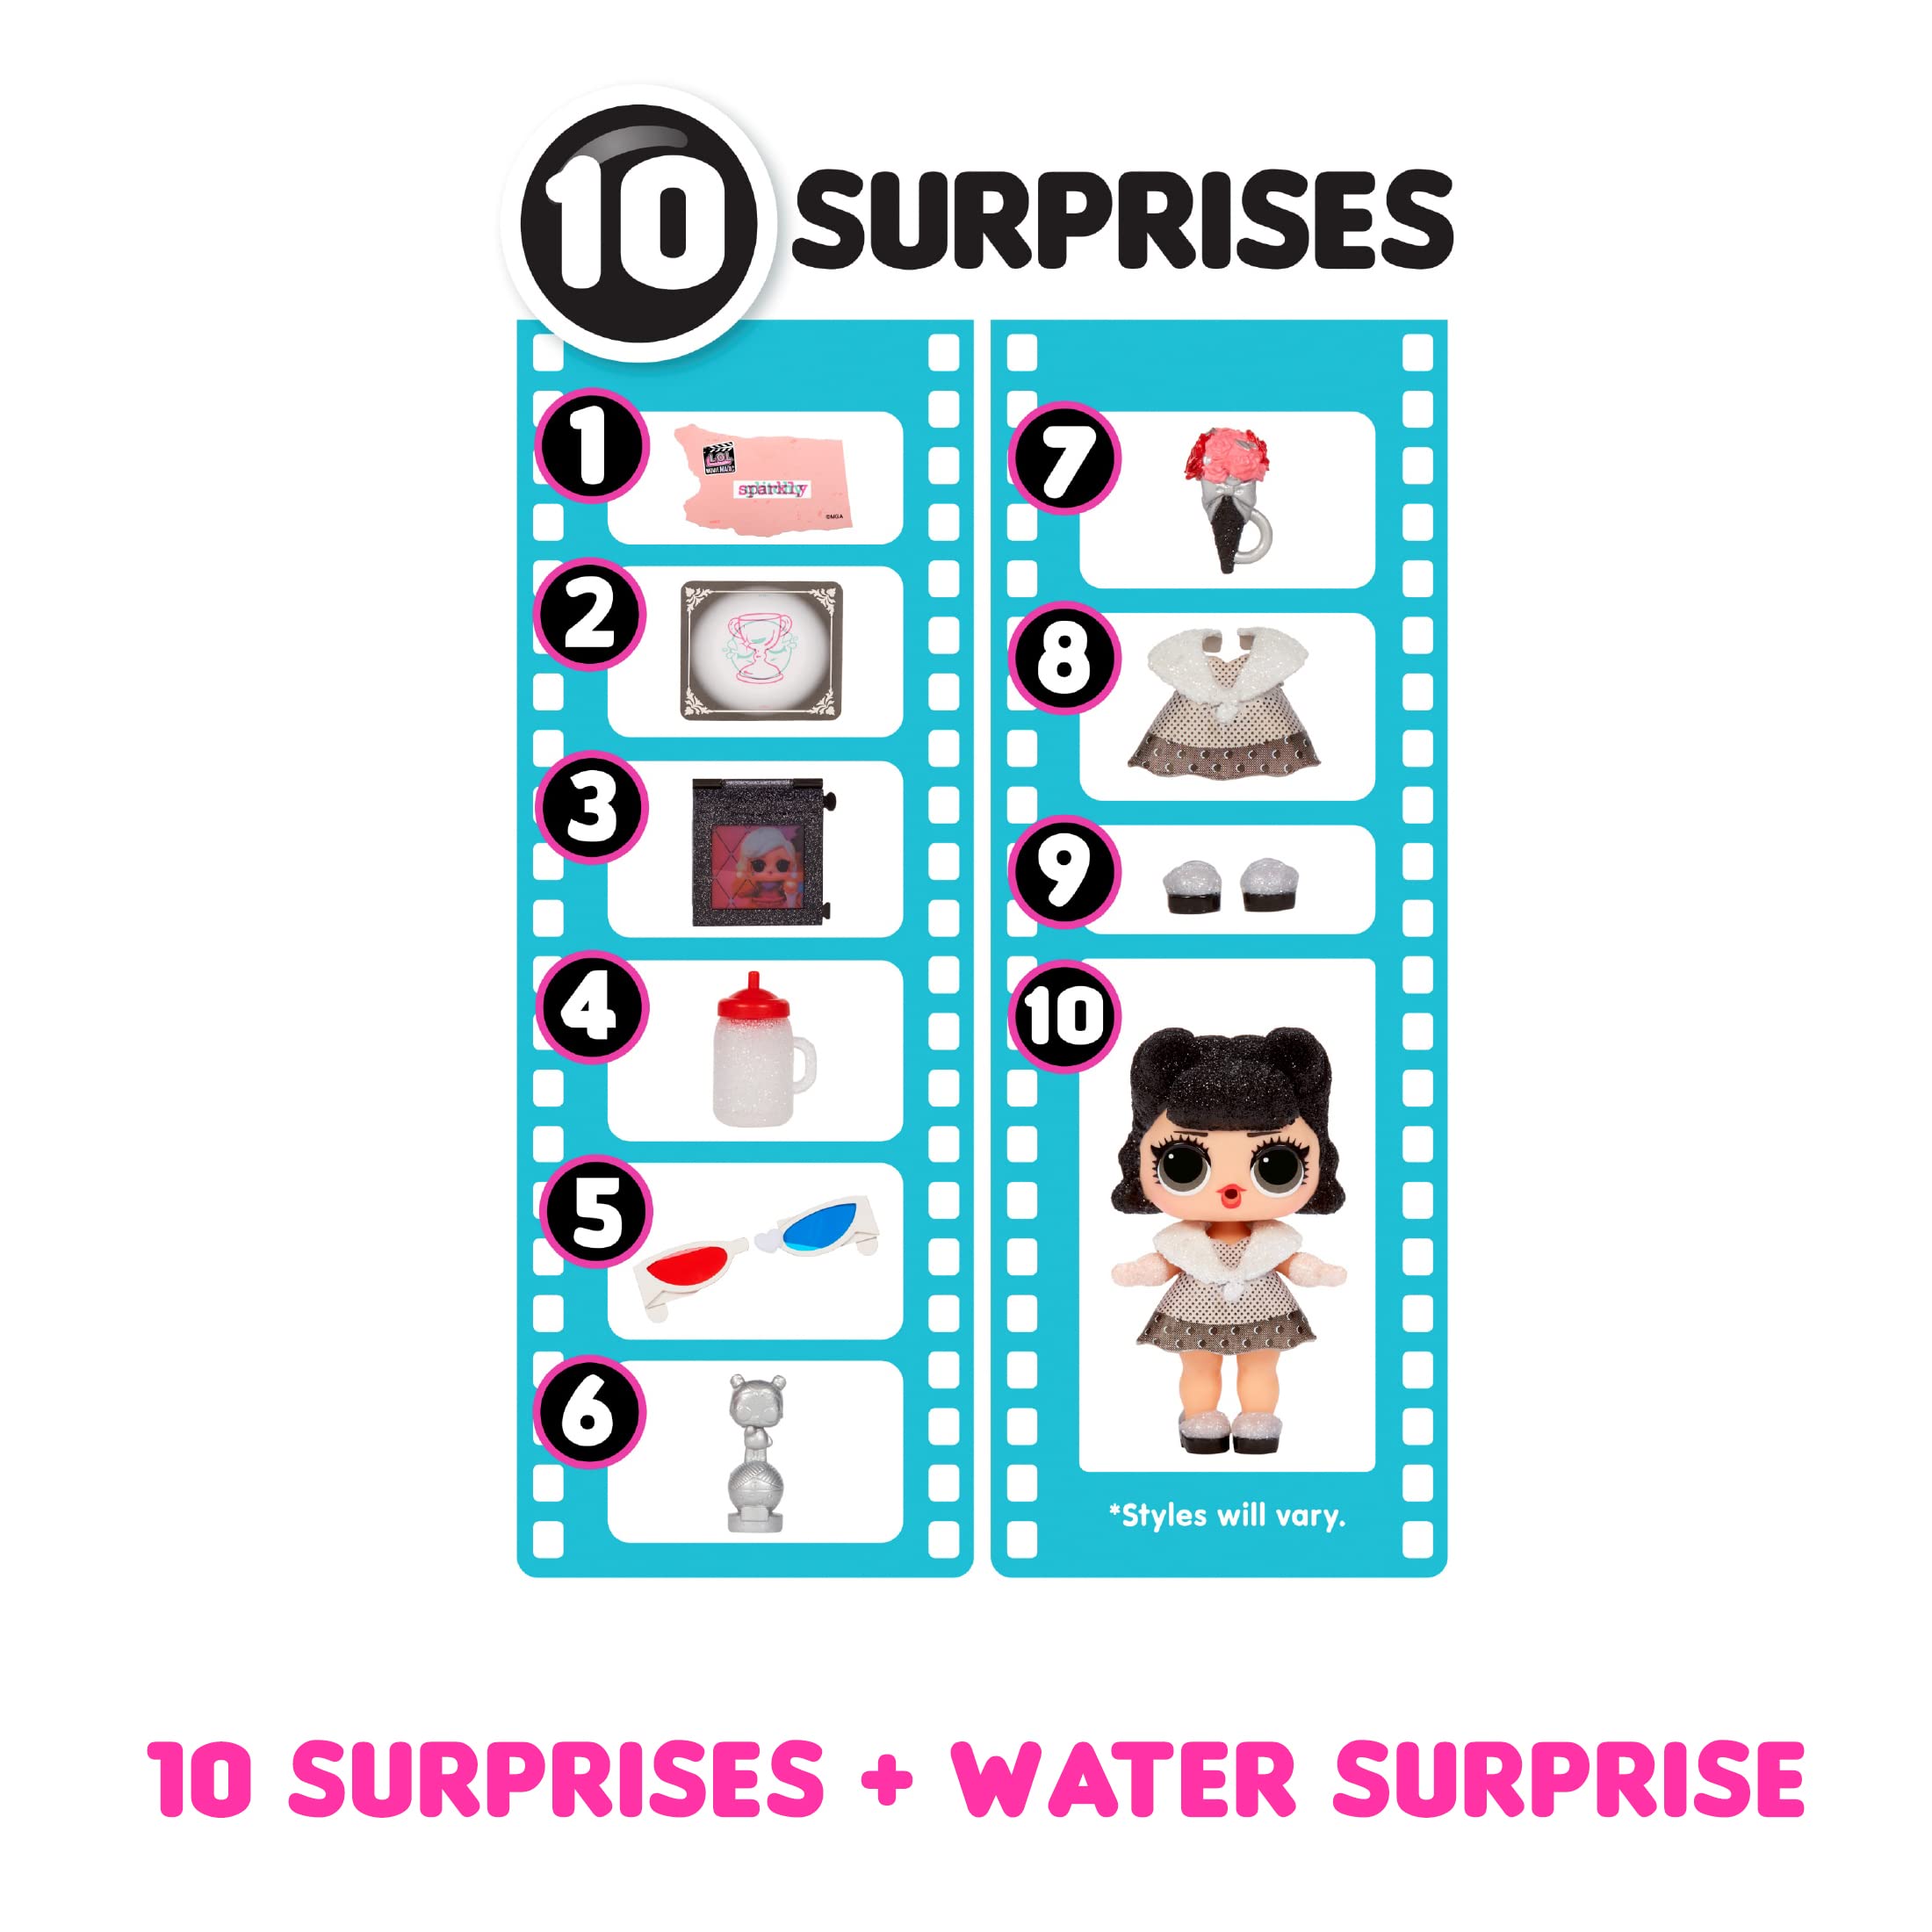 LOL Surprise Movie Magic Dolls with 10 Surprises Including Limited Edition Doll, Film Scenes, Movie Prop Accessories, Color Change – Collectible Gift for Kids, Toys for Girls Boys Ages 4 5 6 7+ Years